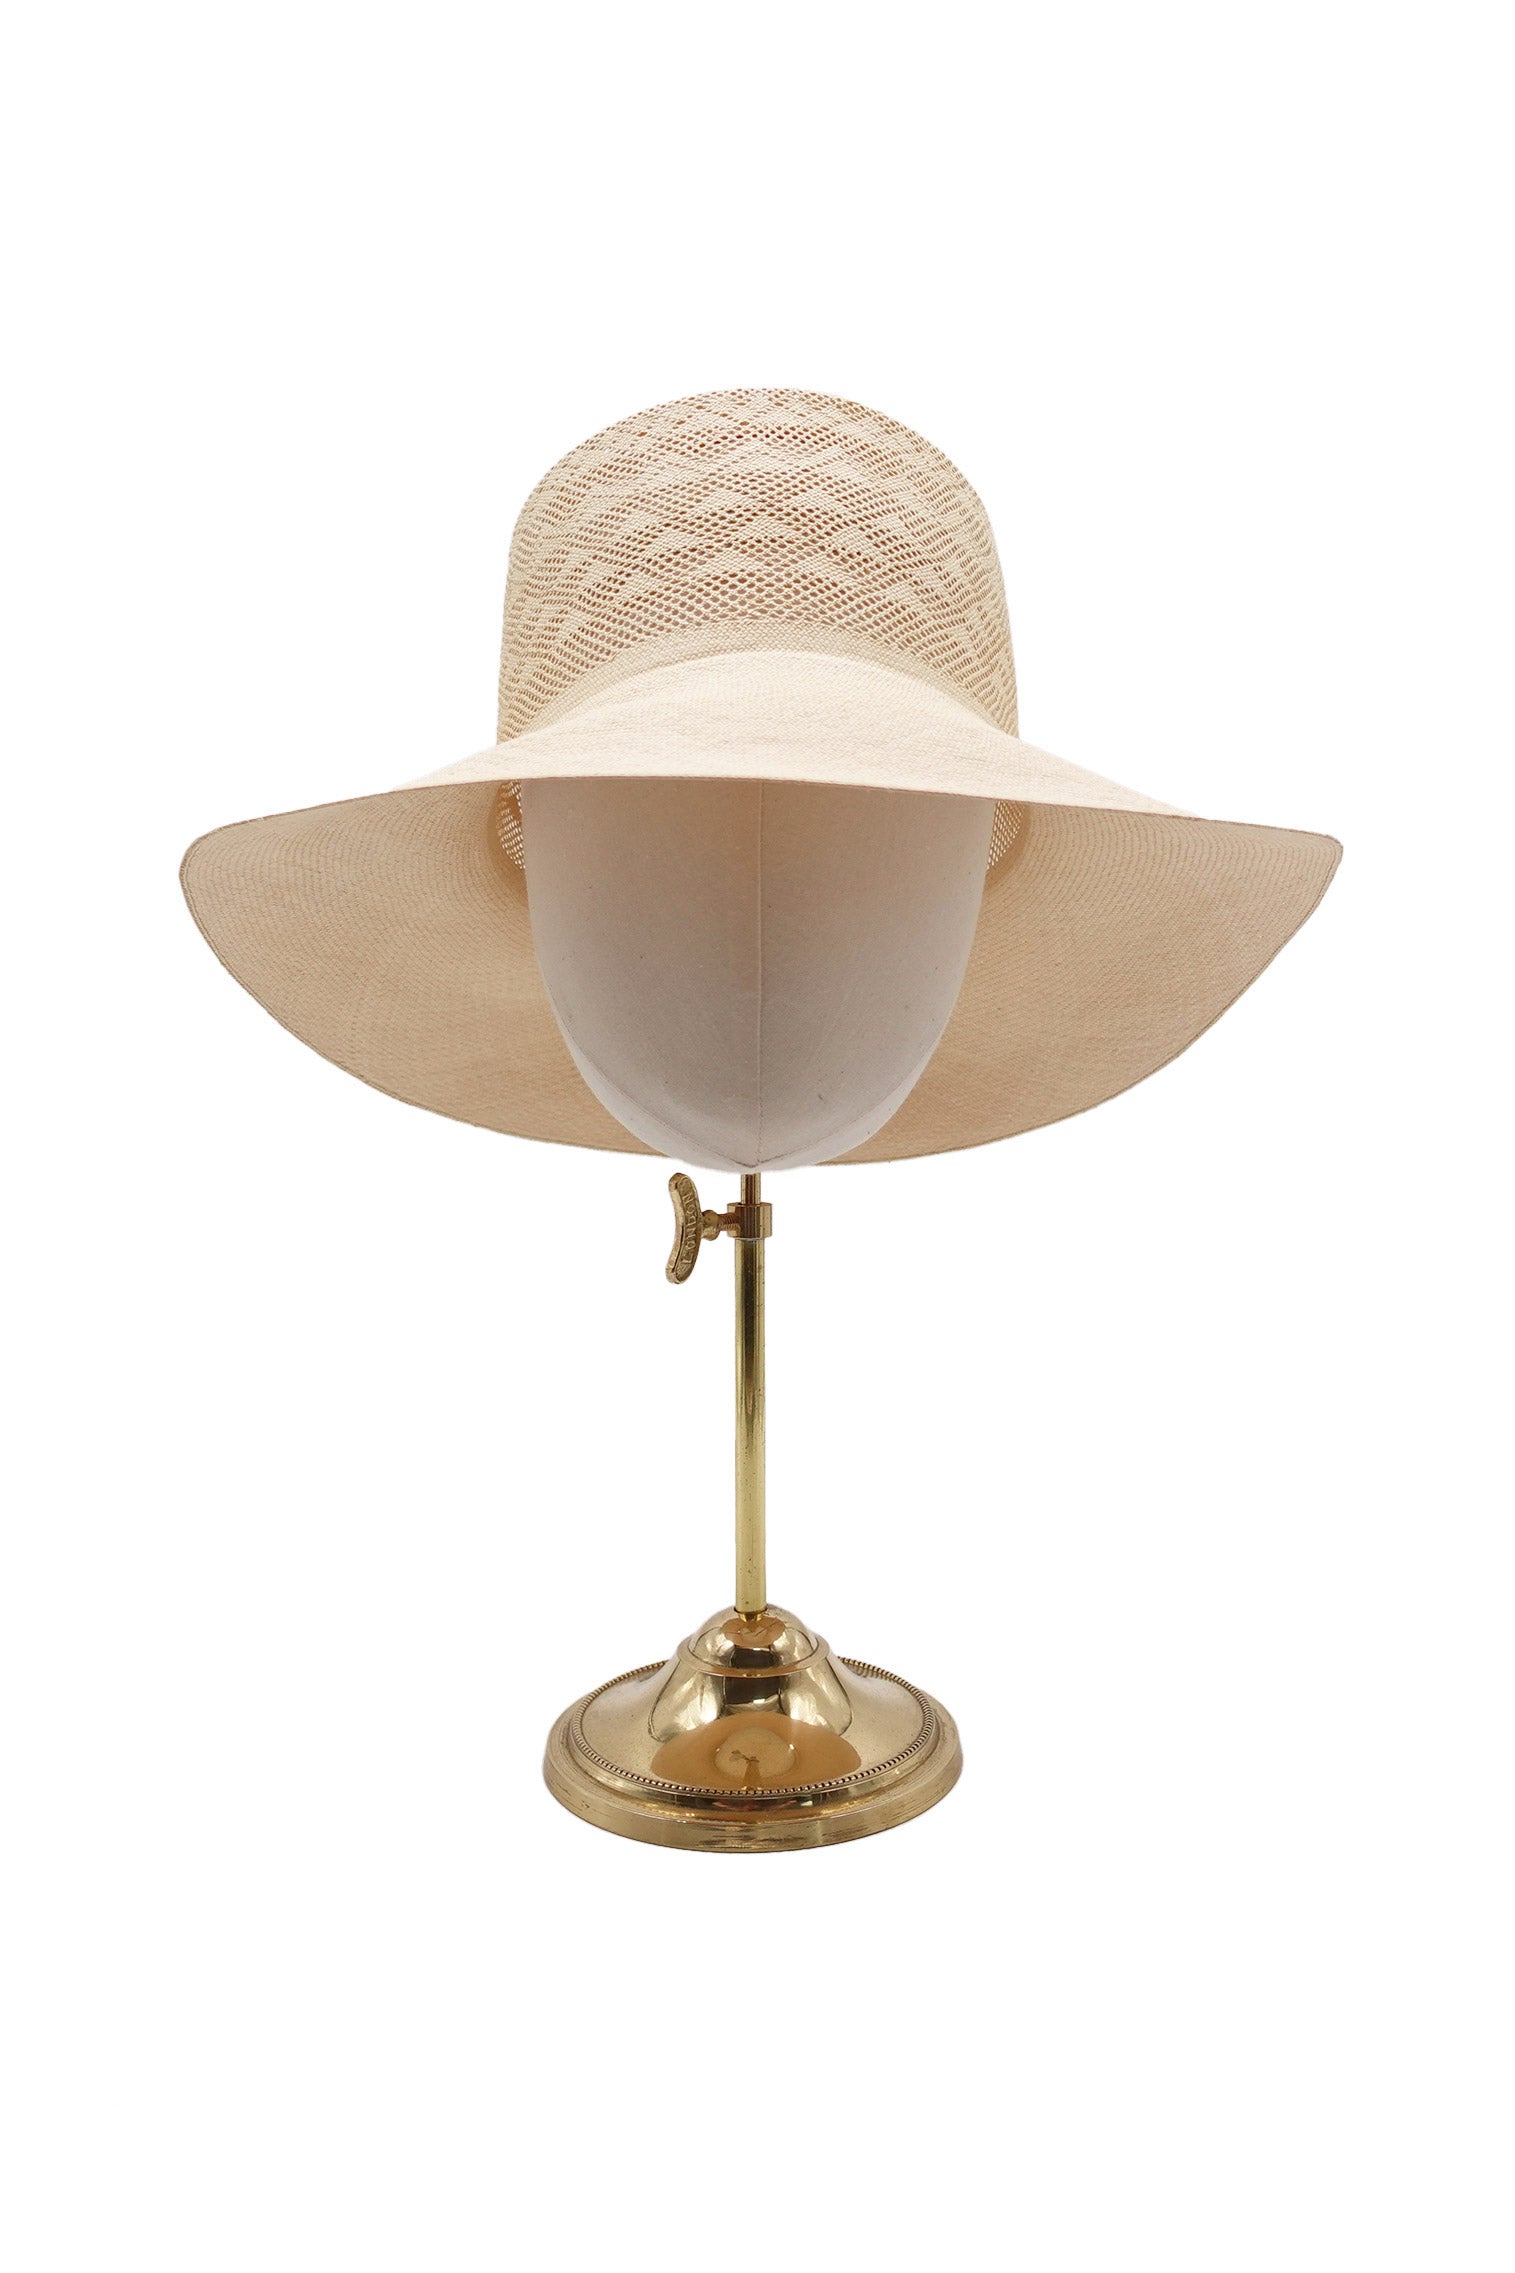 Flora Woven Panama - The Bespoke Embroidered Panama Hat Collection - Lock & Co. Hatters London UK